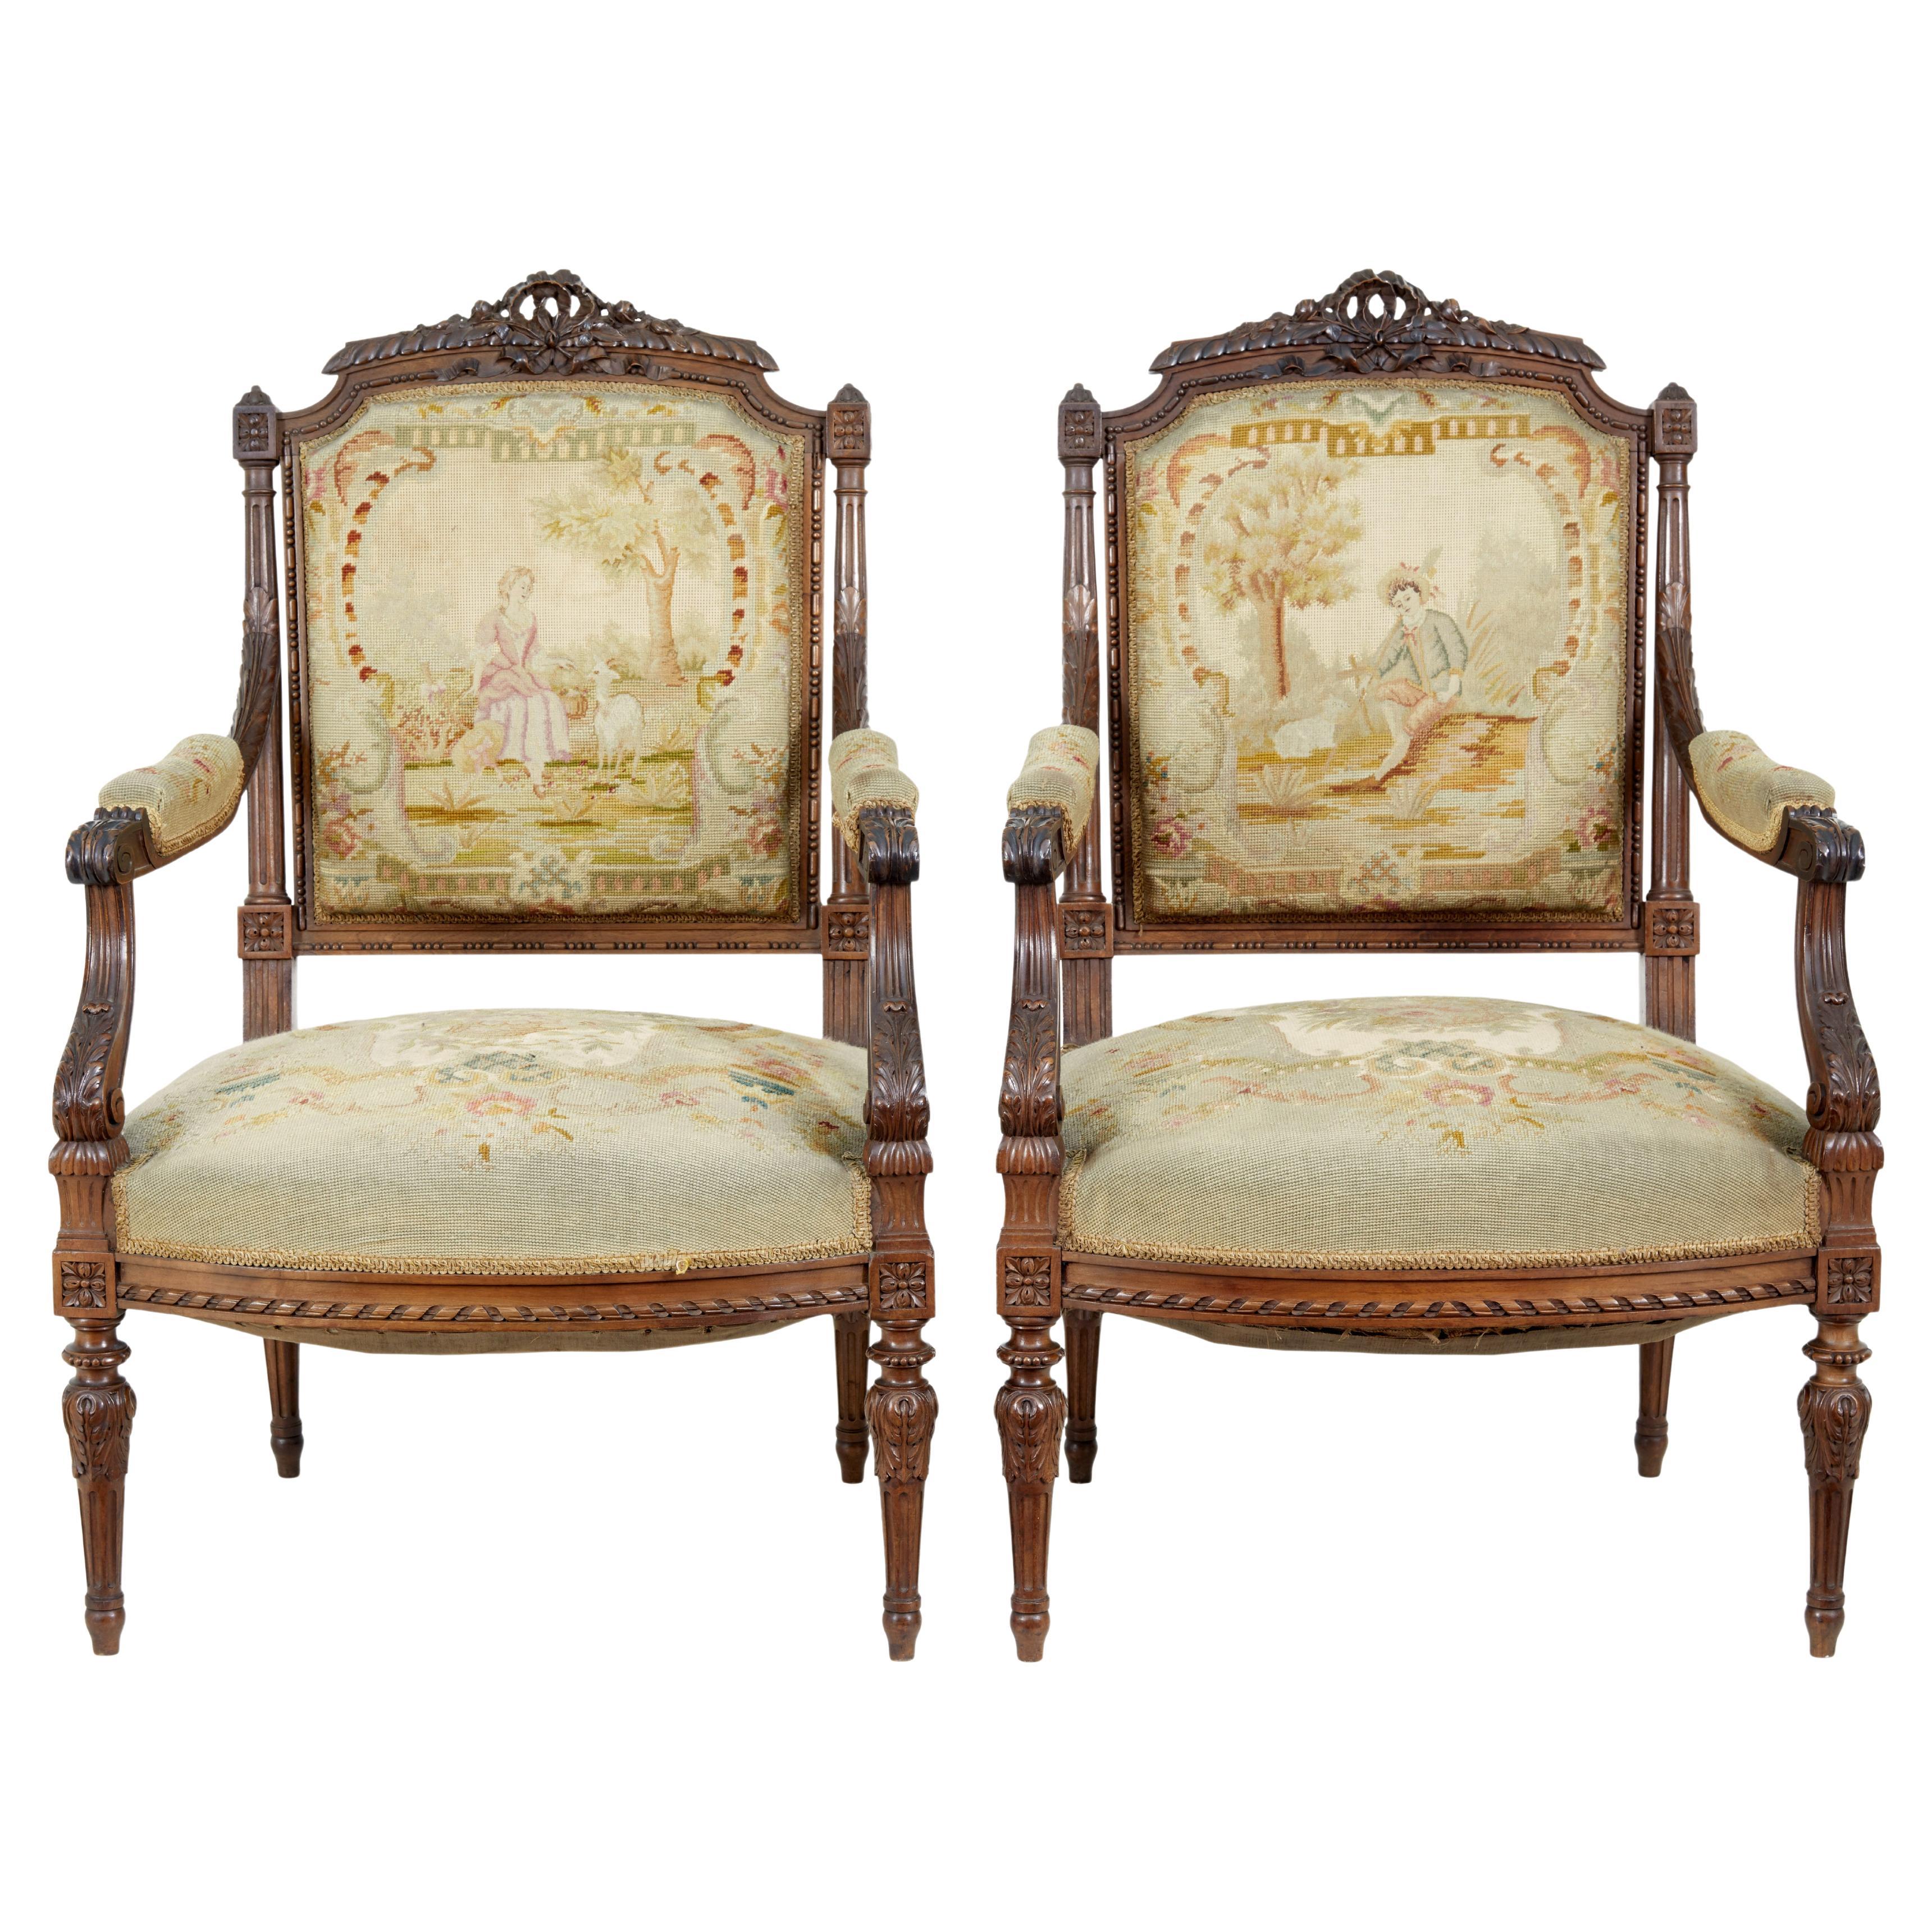 19th century French carved walnut tapestry armchairs For Sale